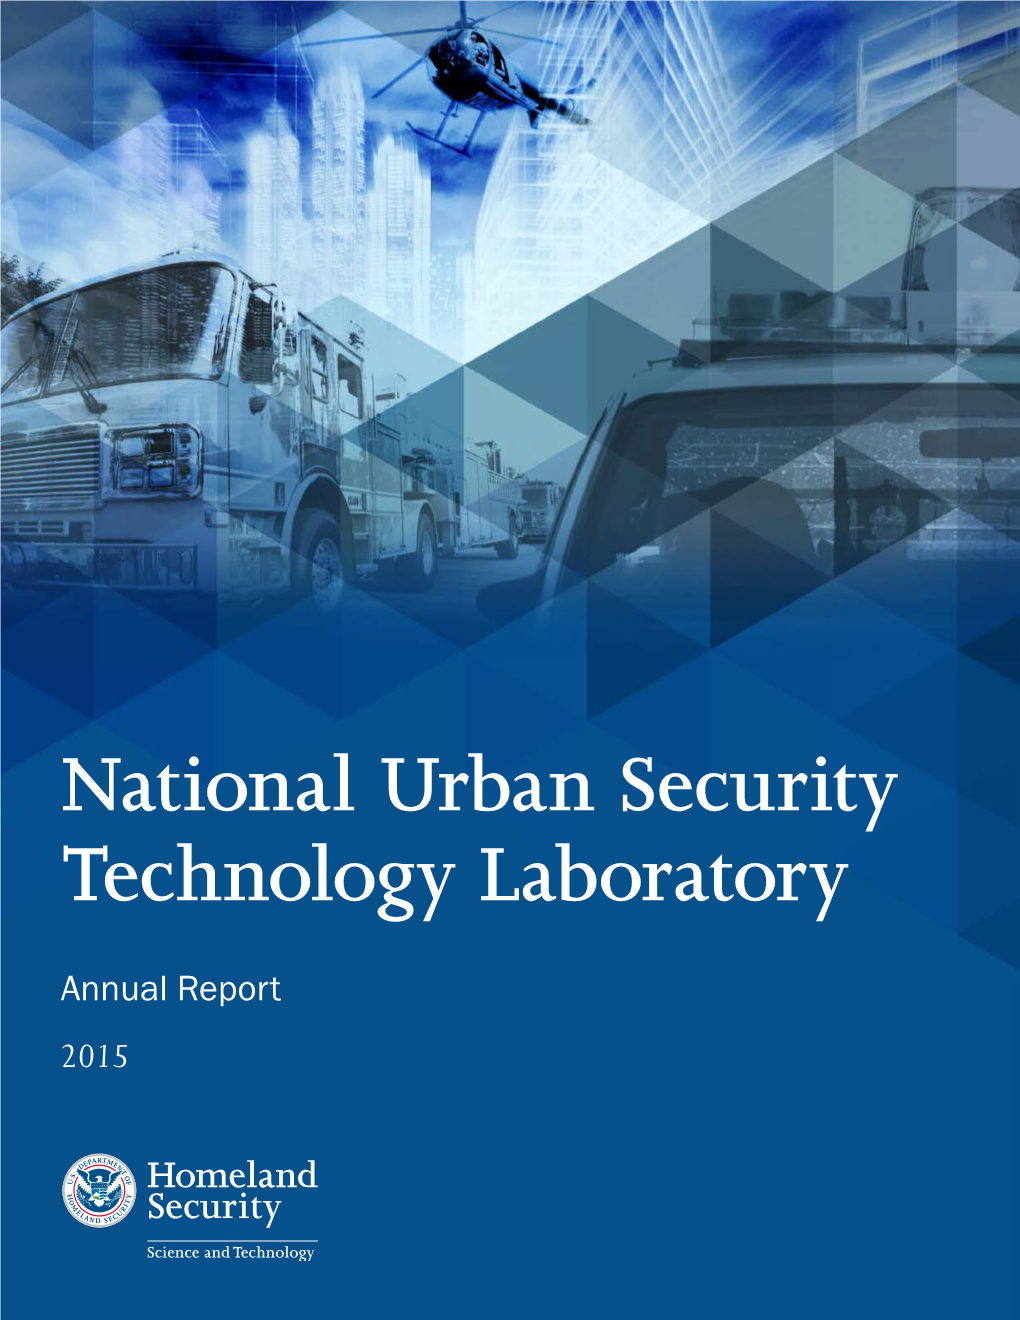 National Urban Security Technology Laboratory 2015 Annual Report